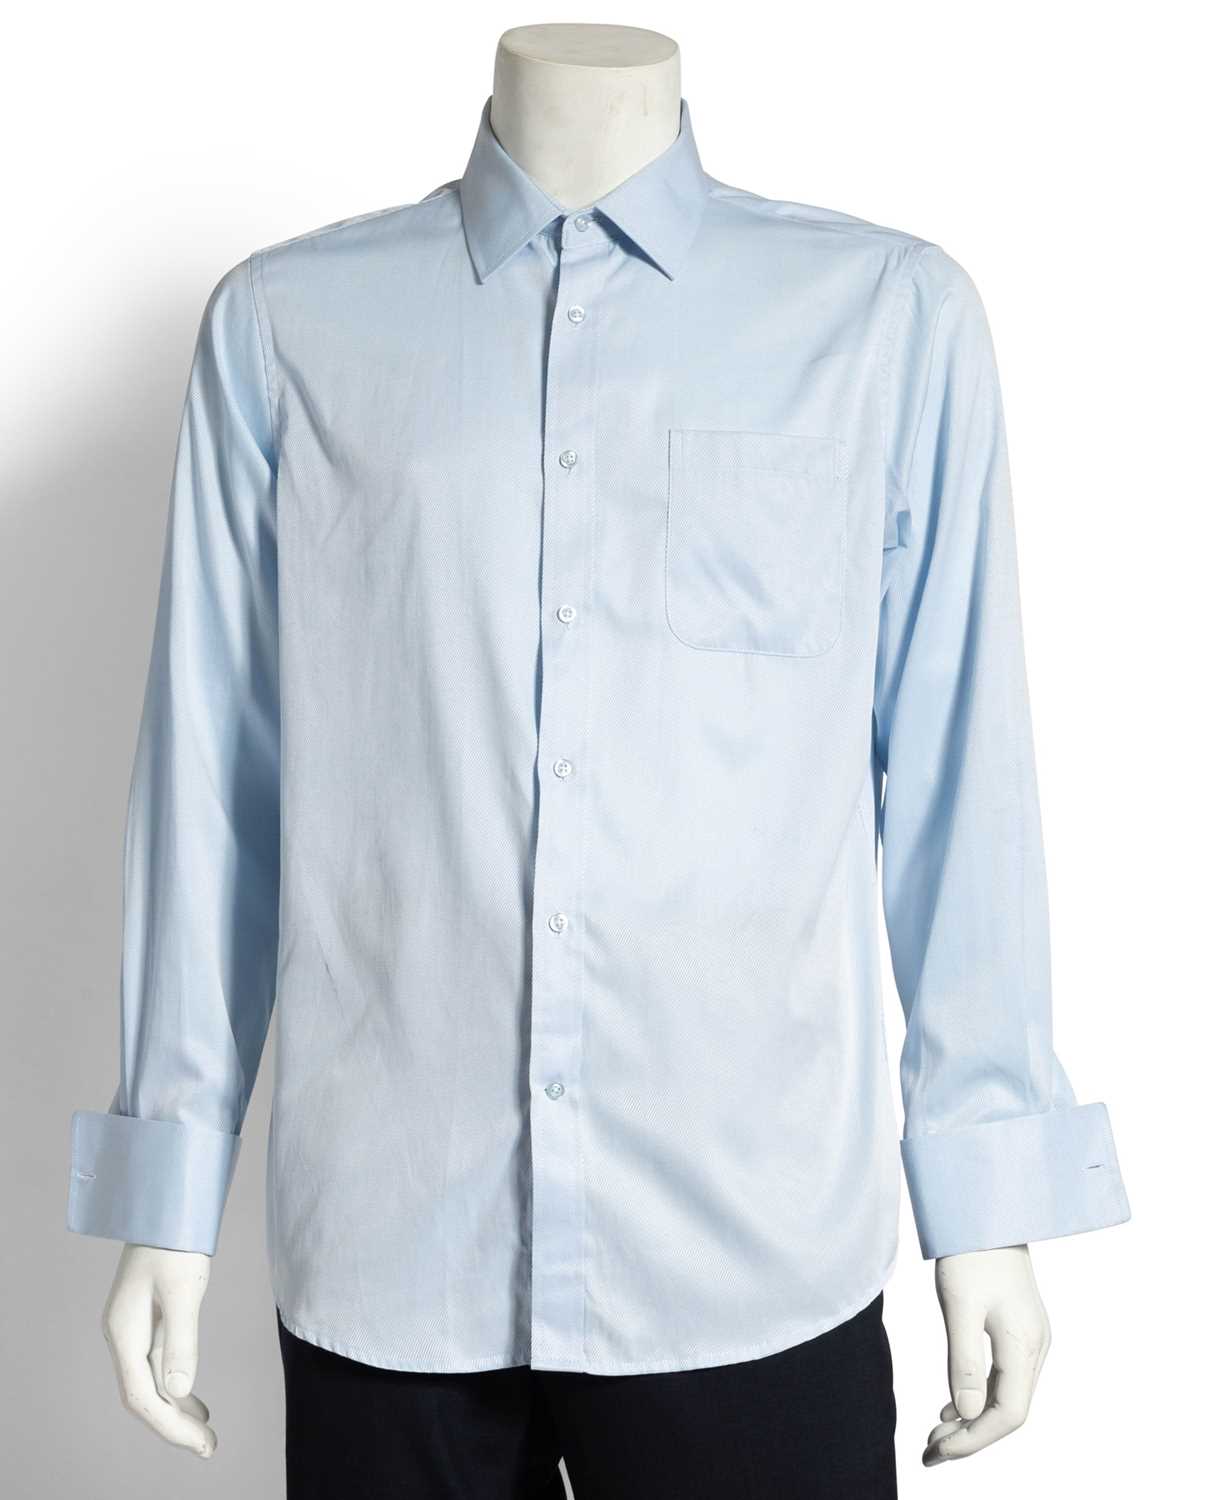 Lot 5015 - French cuff dress shirt worn by Mark Jacoby as "Father" in the Ragtime Reunion Concert